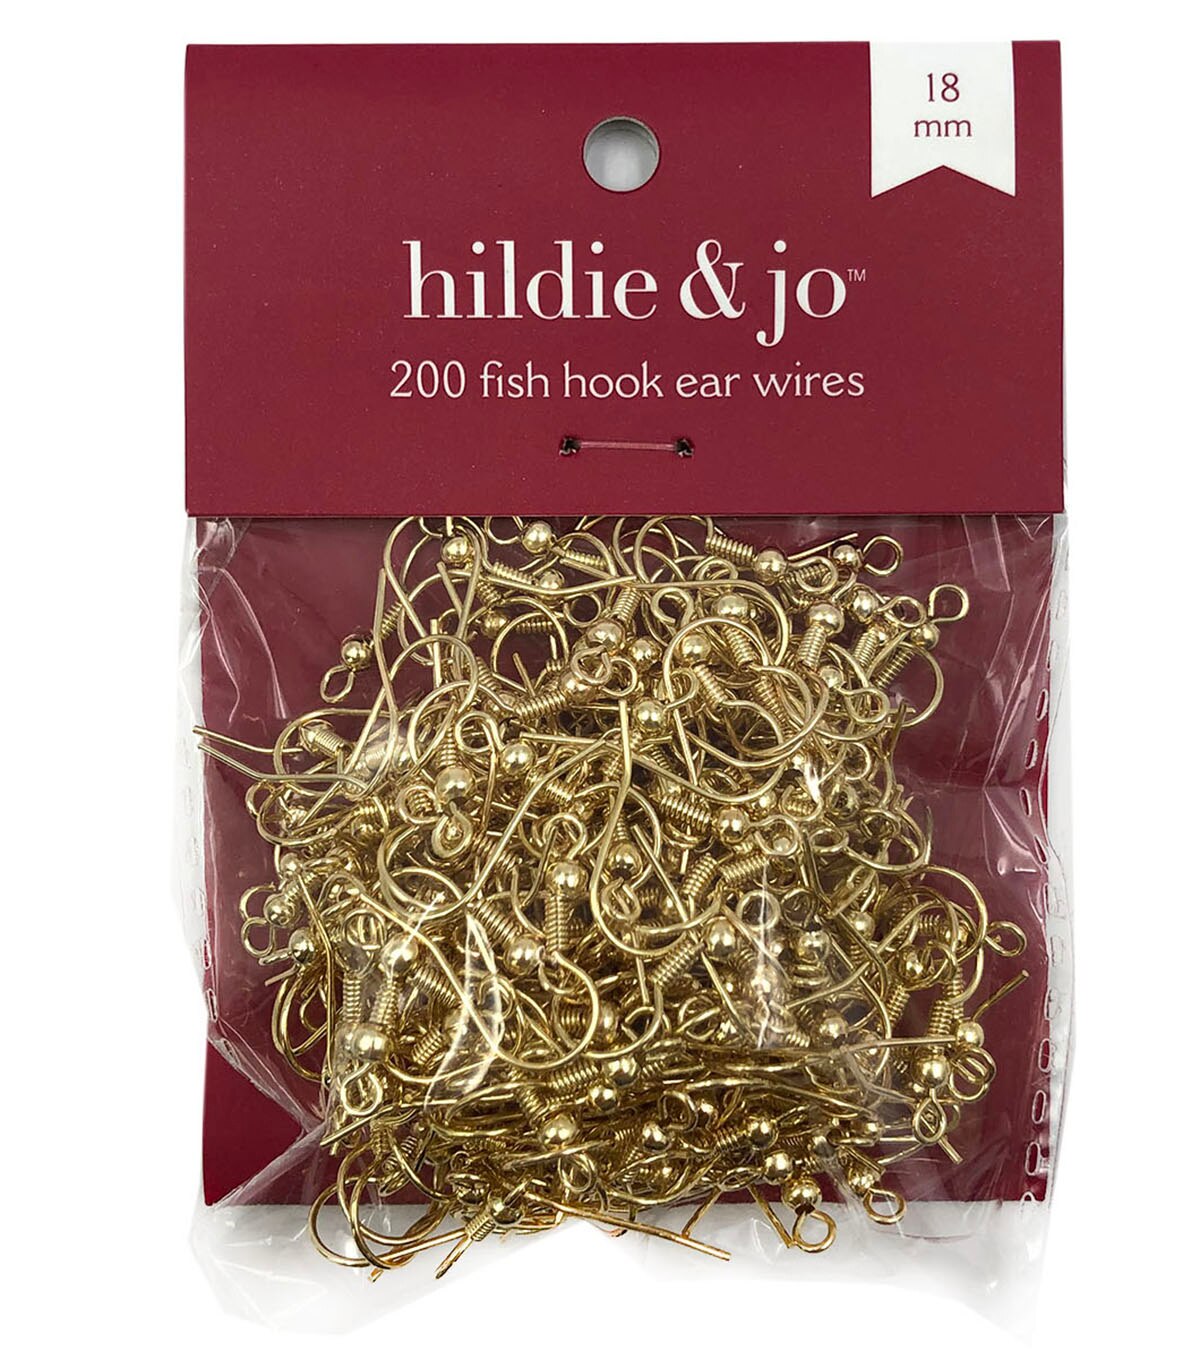 18mm Gold Fish Hook Ear Wires 200pk by hildie & jo